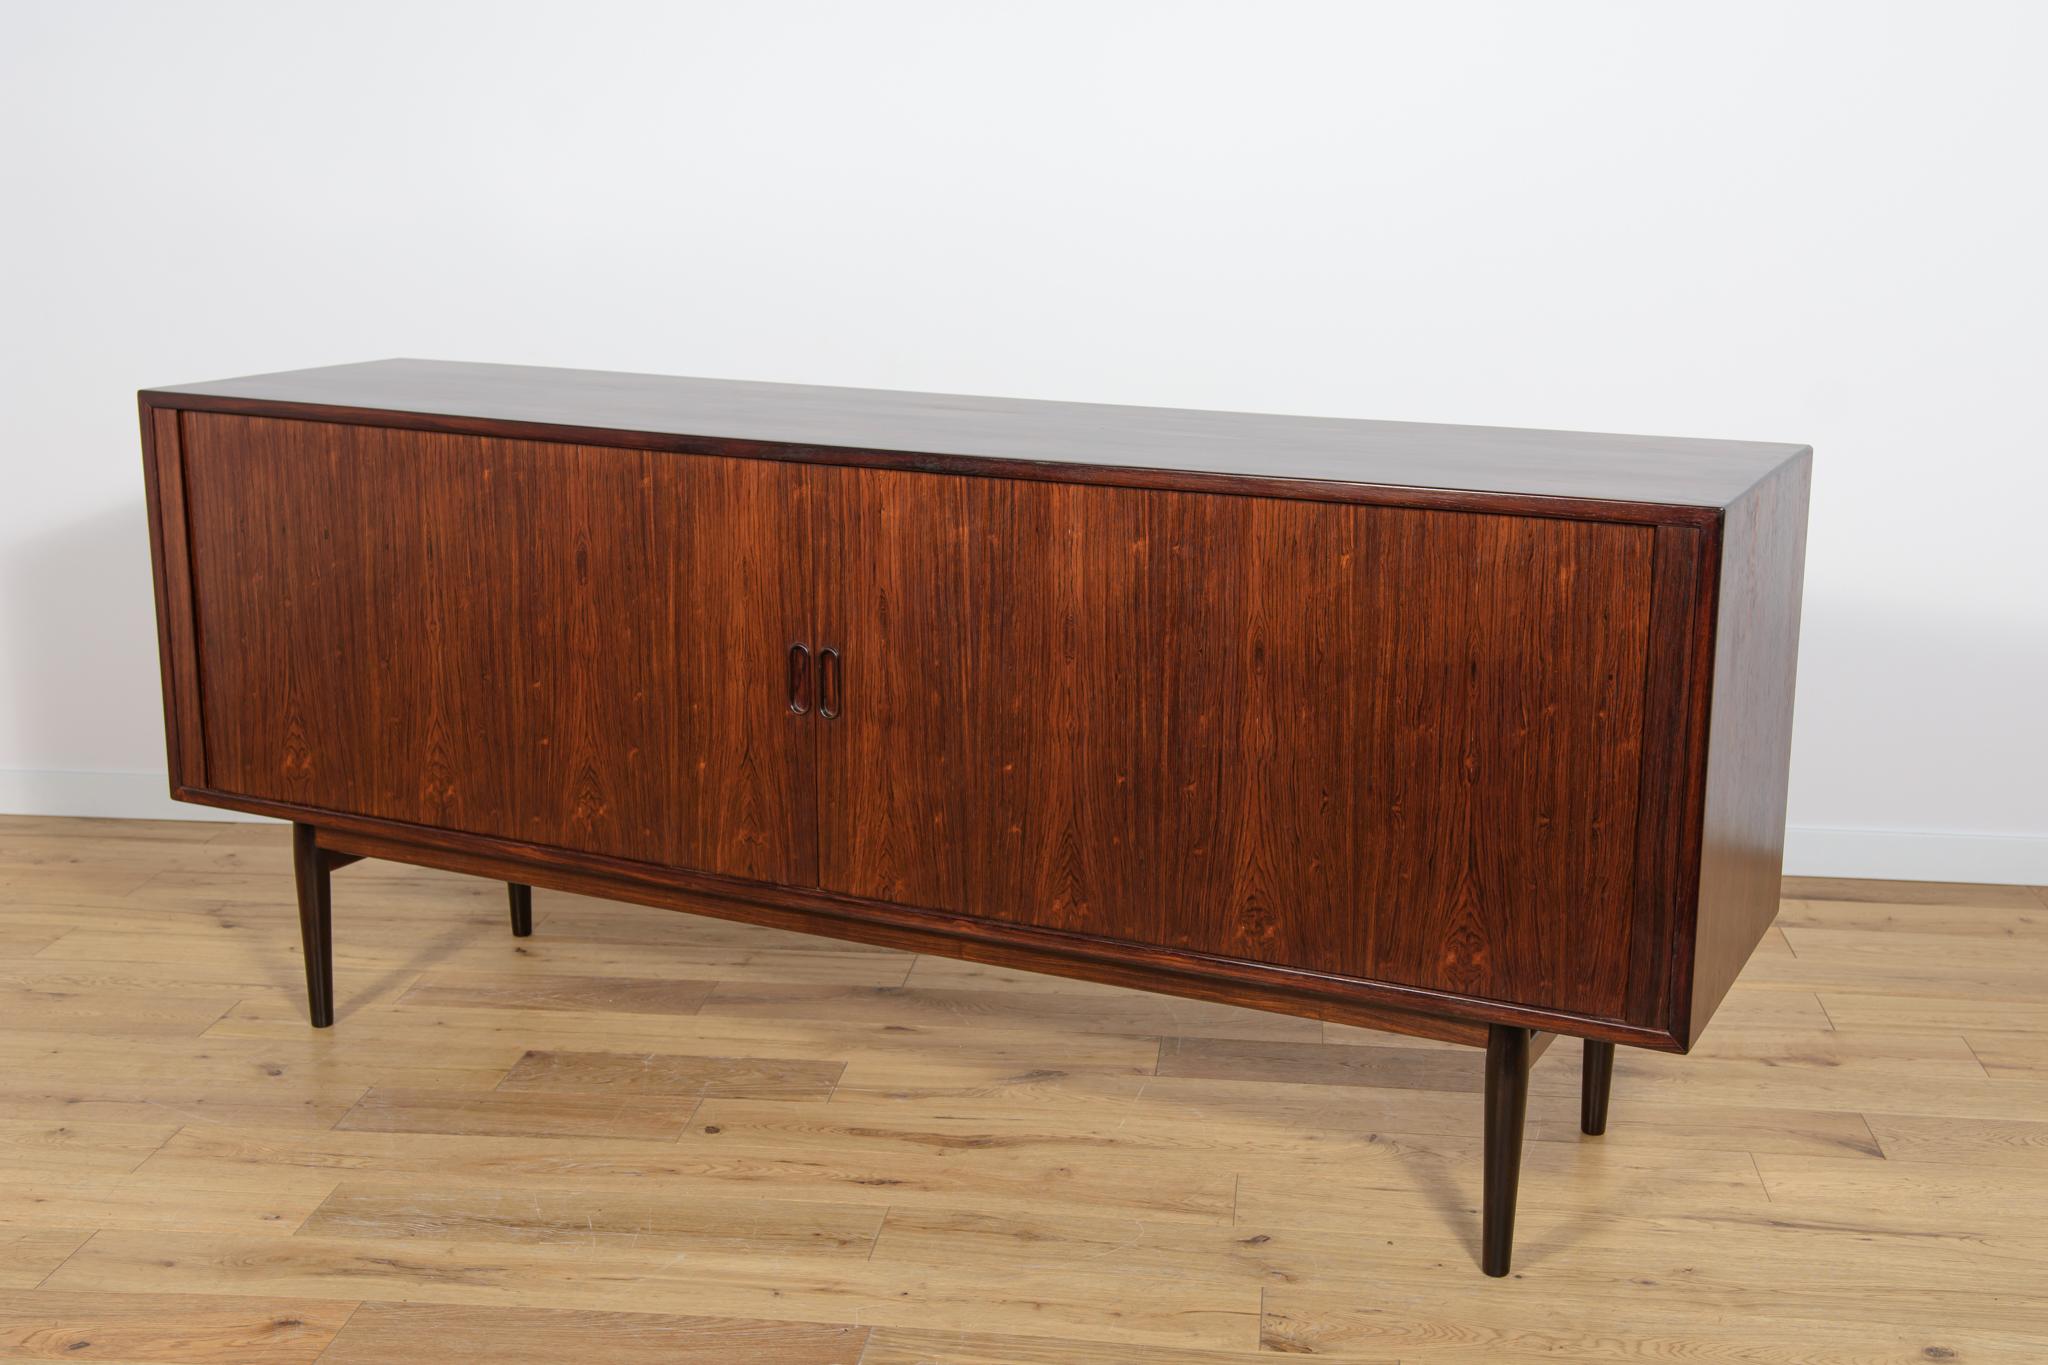 A unique Model 37 sideboard designed by Arne Vodder, produced in the 1960s in the Danish Sibast factory. Sideboard has an interesting roller door system, inside there are shelves and two drawers. Furniture made of rosewood with profiled handles. The